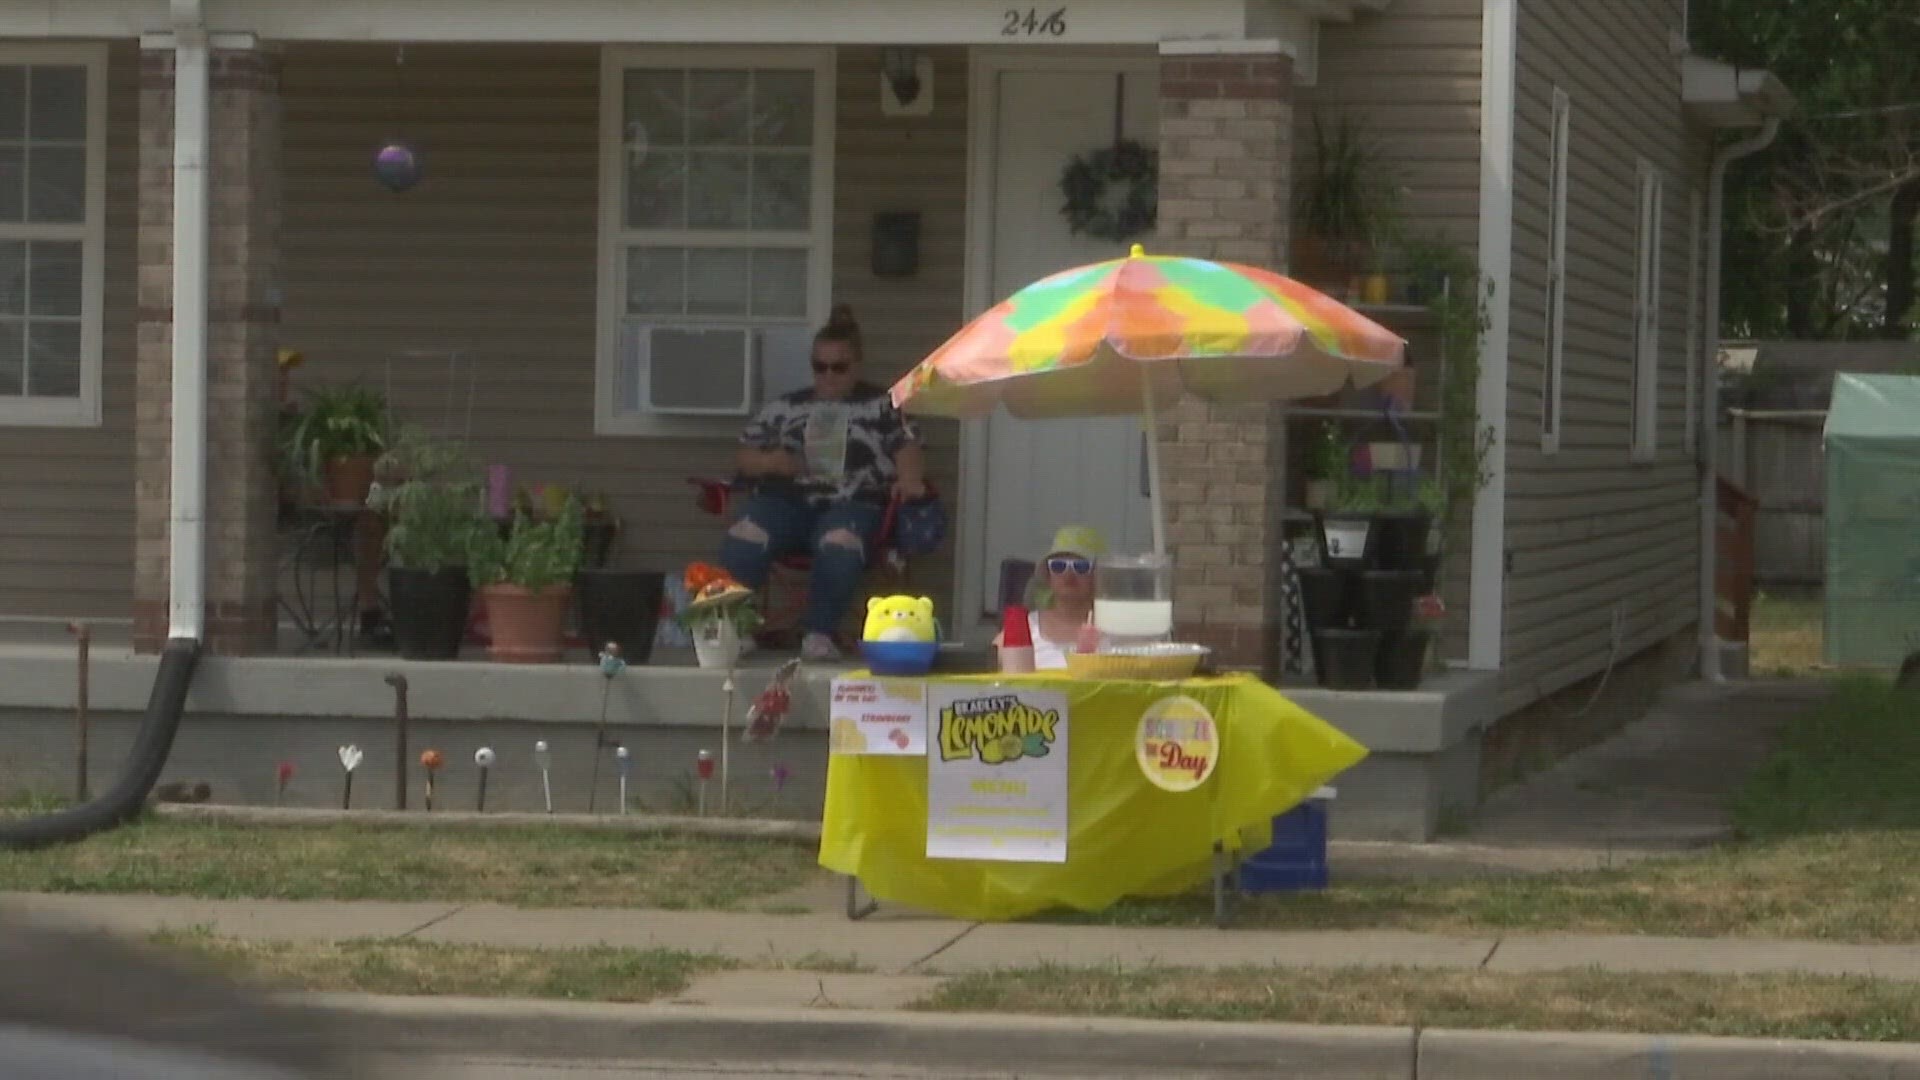 Under current Indiana law, kids who want to run a lemonade stand first need a permit and inspection from the county health department.